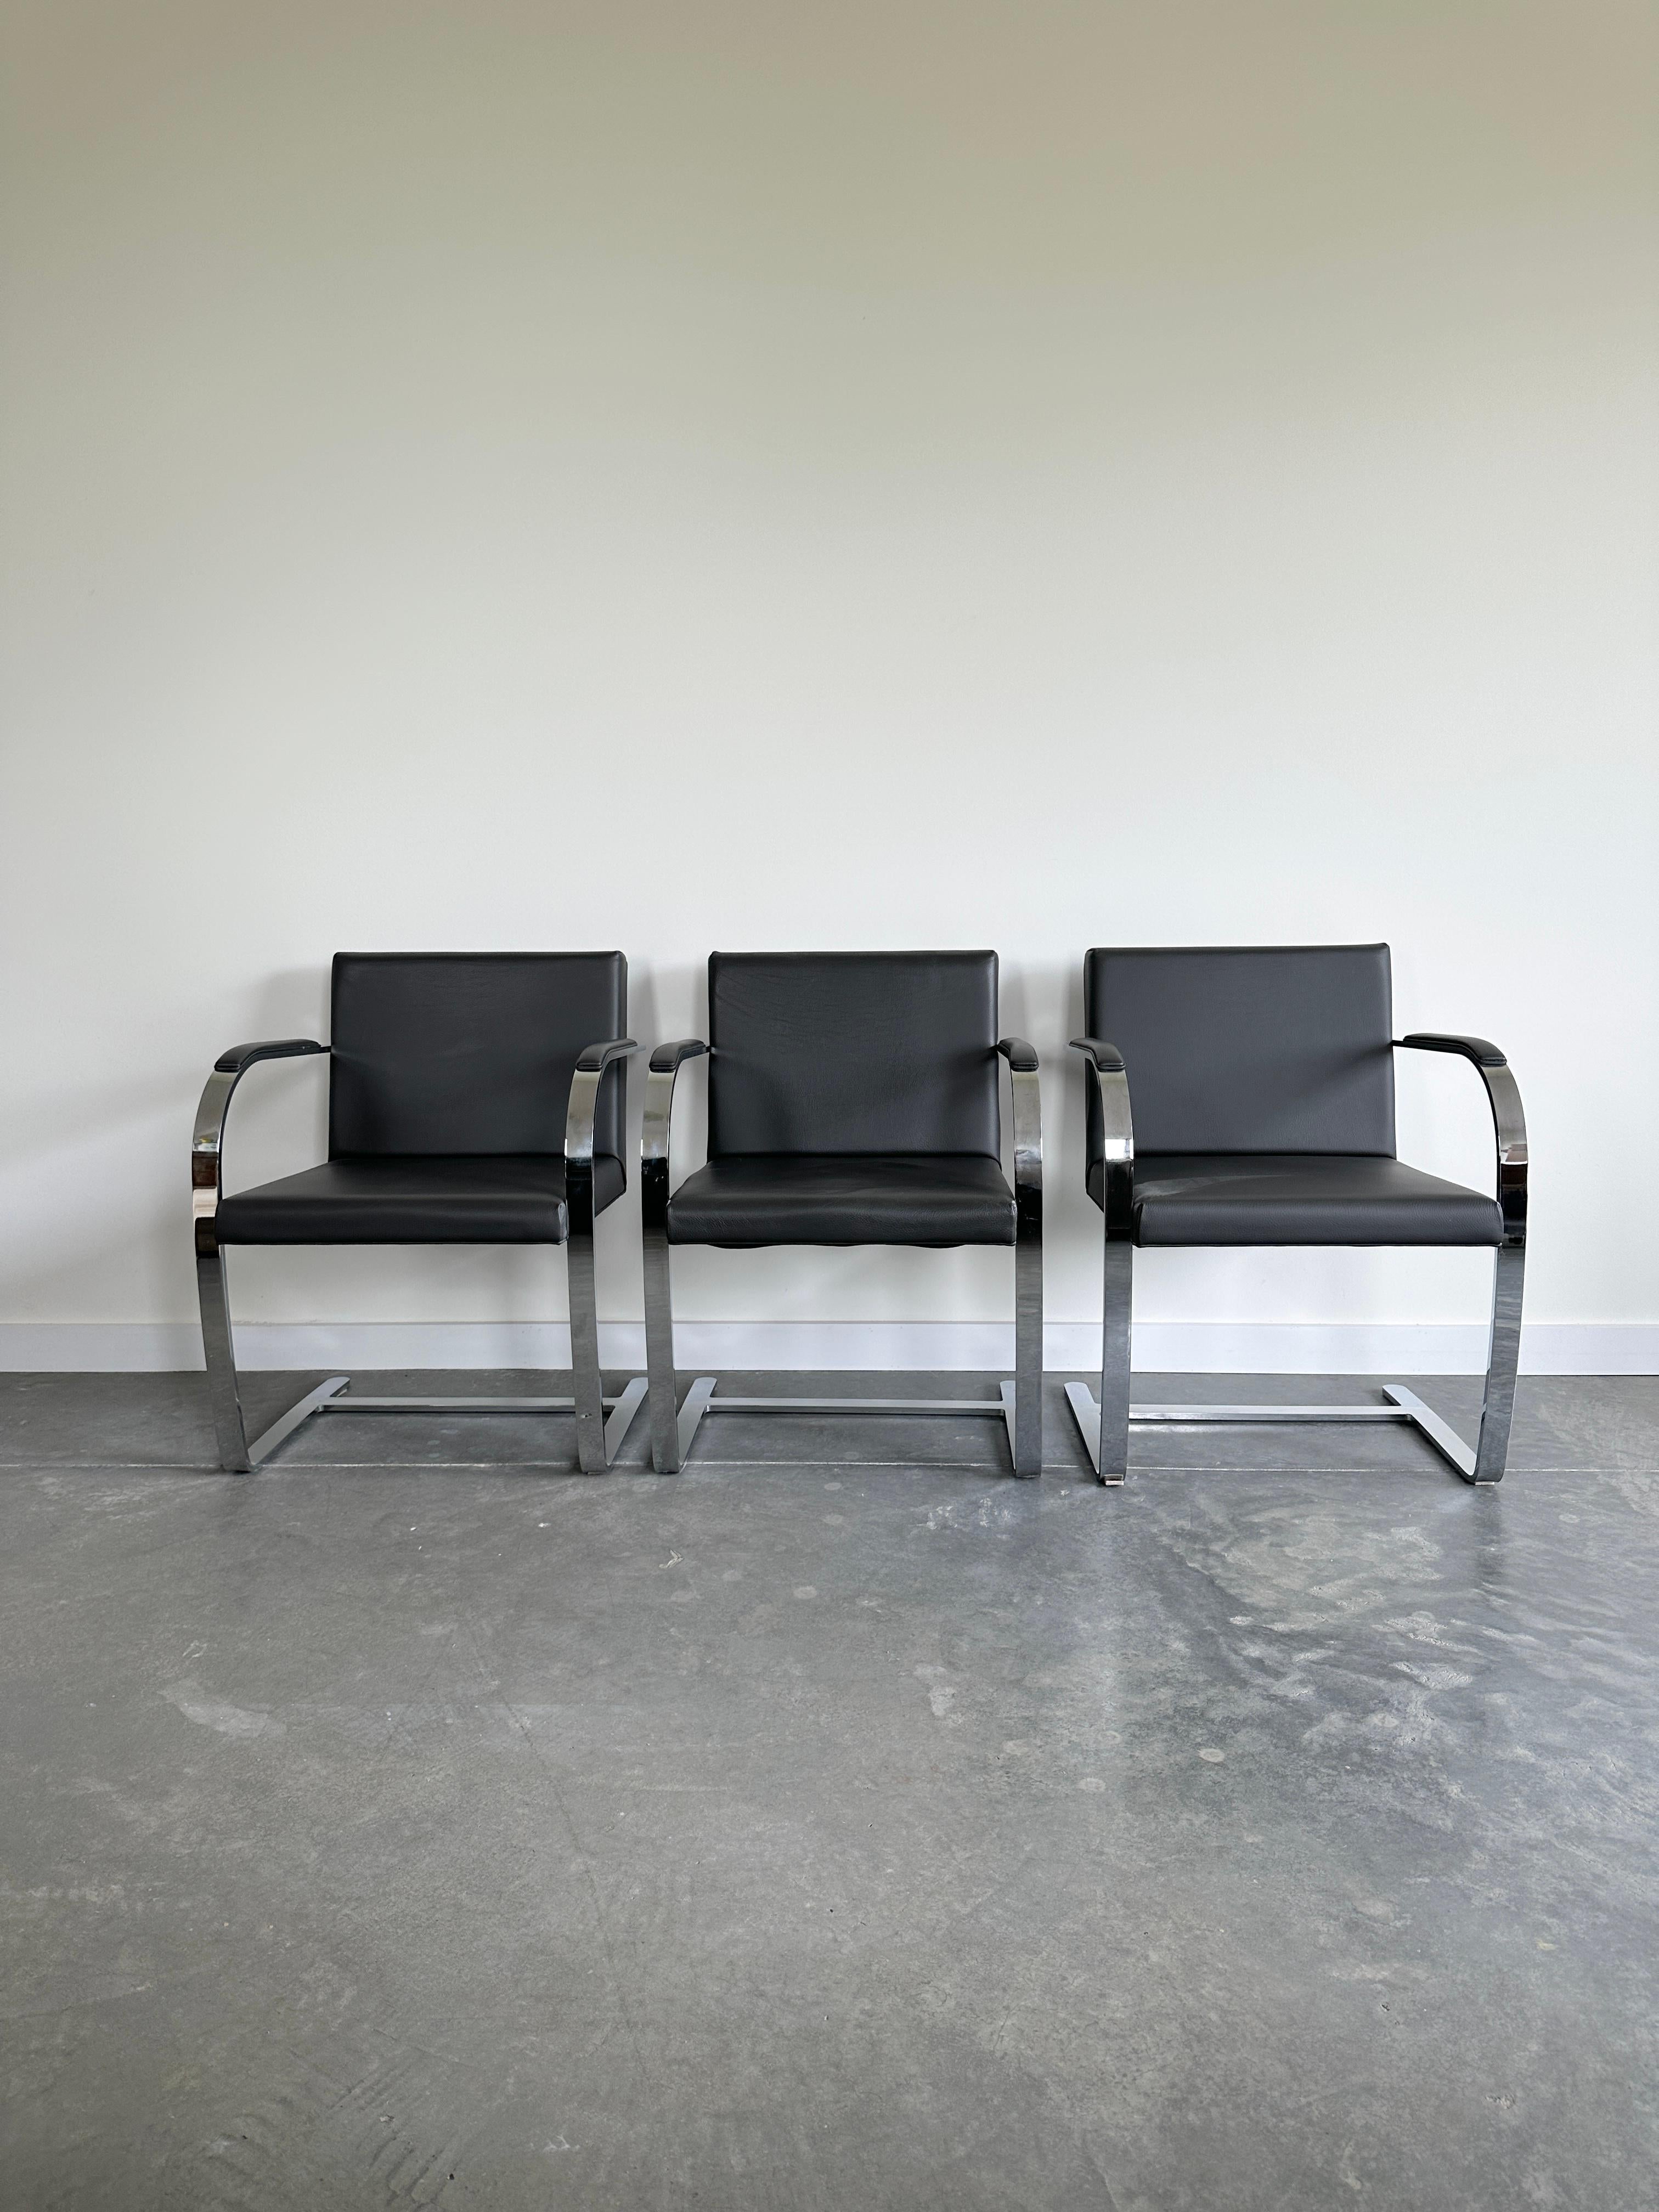 The Flat Bar Brno chair model 255 is a remarkable example of modern design by the renowned architect Ludwig Mies van der Rohe. He designed it in 1930 for the Tugendhat House in Brno, Czech Republic, a UNESCO World Heritage Site. The chair has a